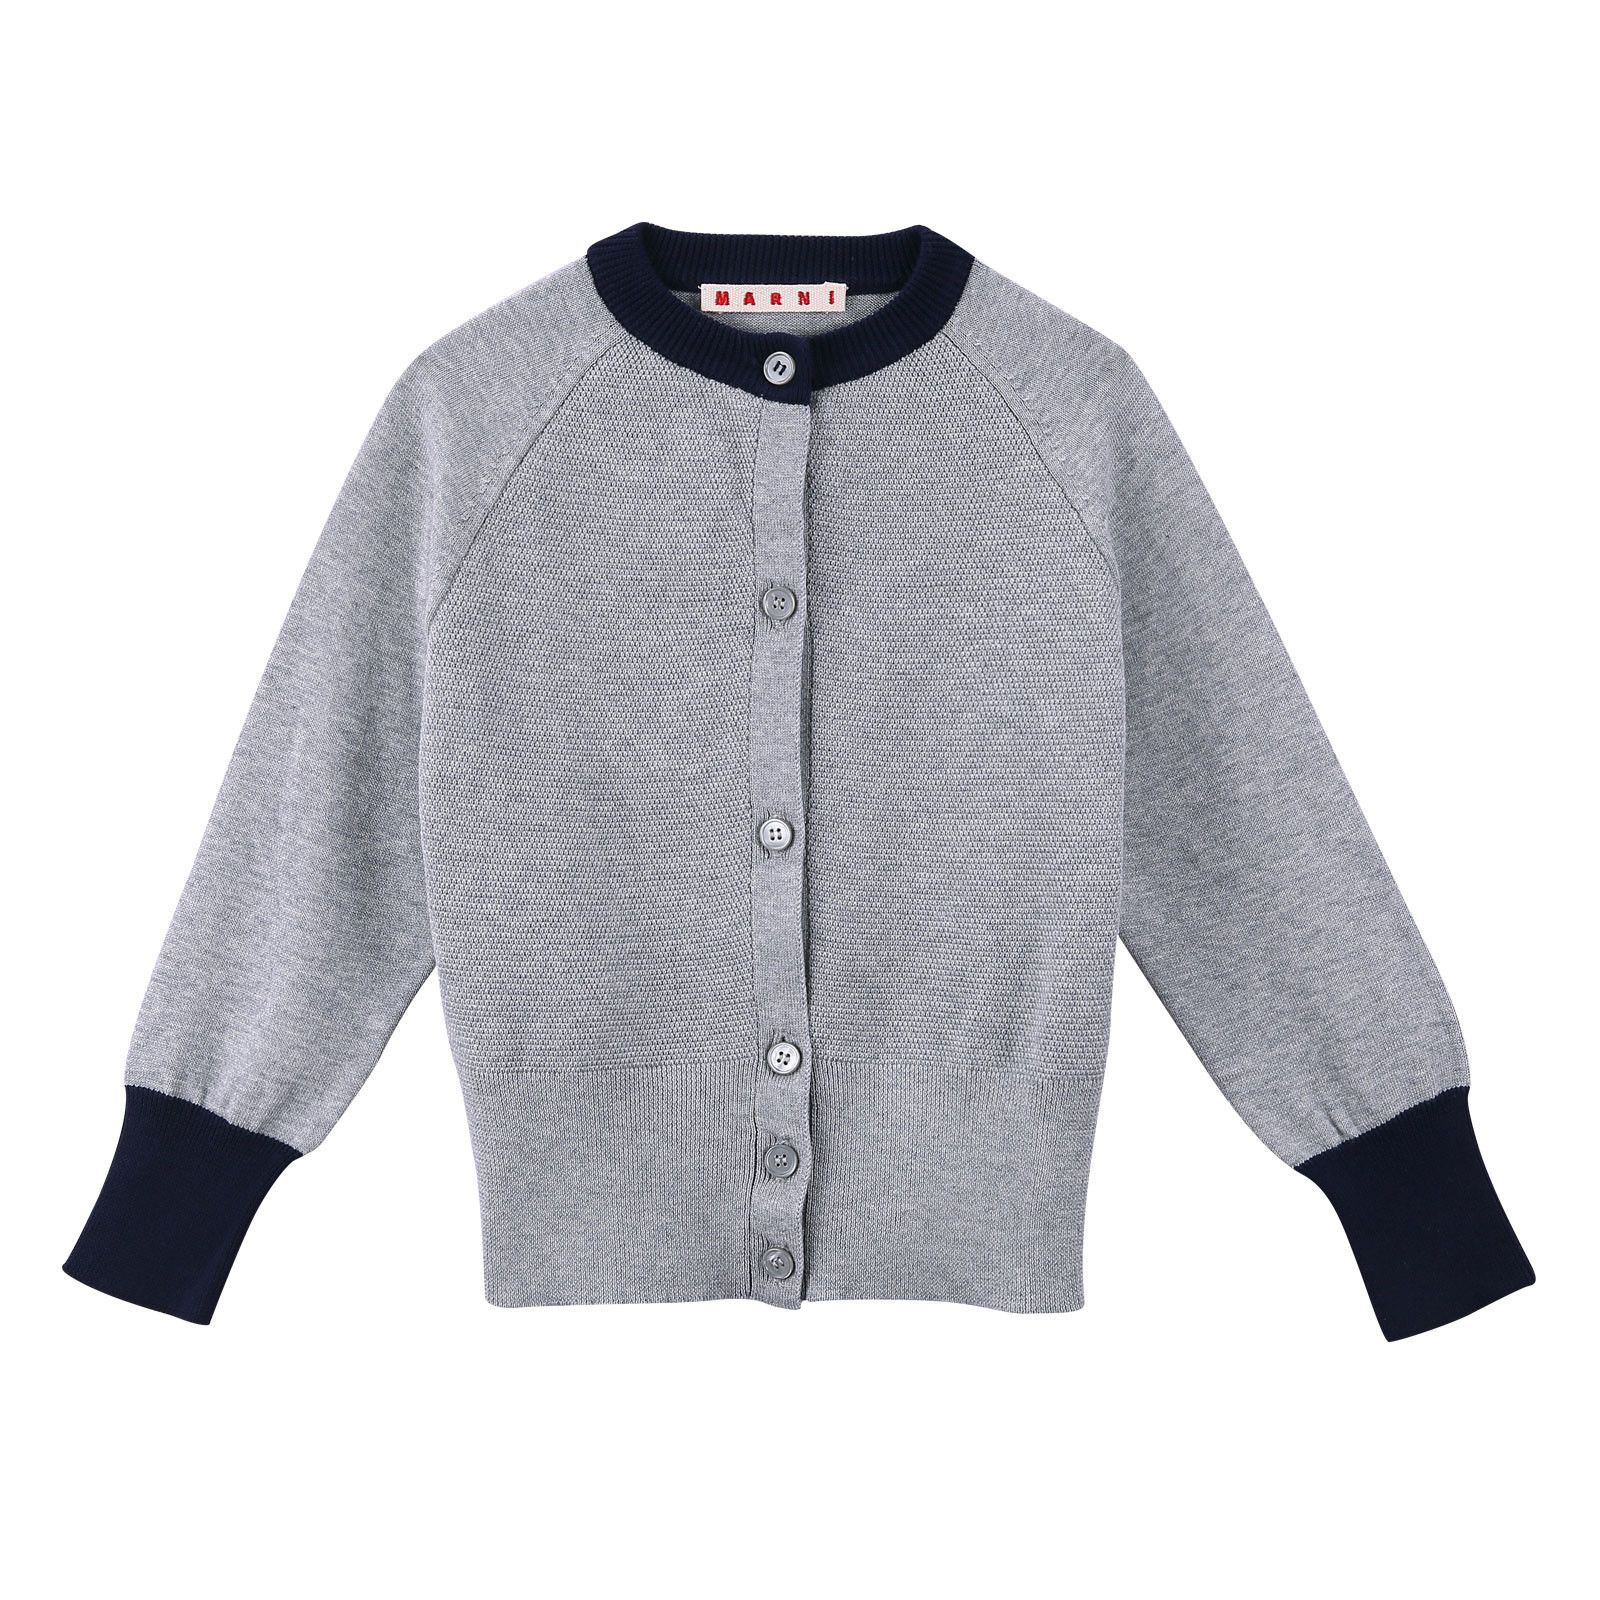 Girls Grey Knitted Cotton Cardigan With Ribbed Cuffs - CÉMAROSE | Children's Fashion Store - 1